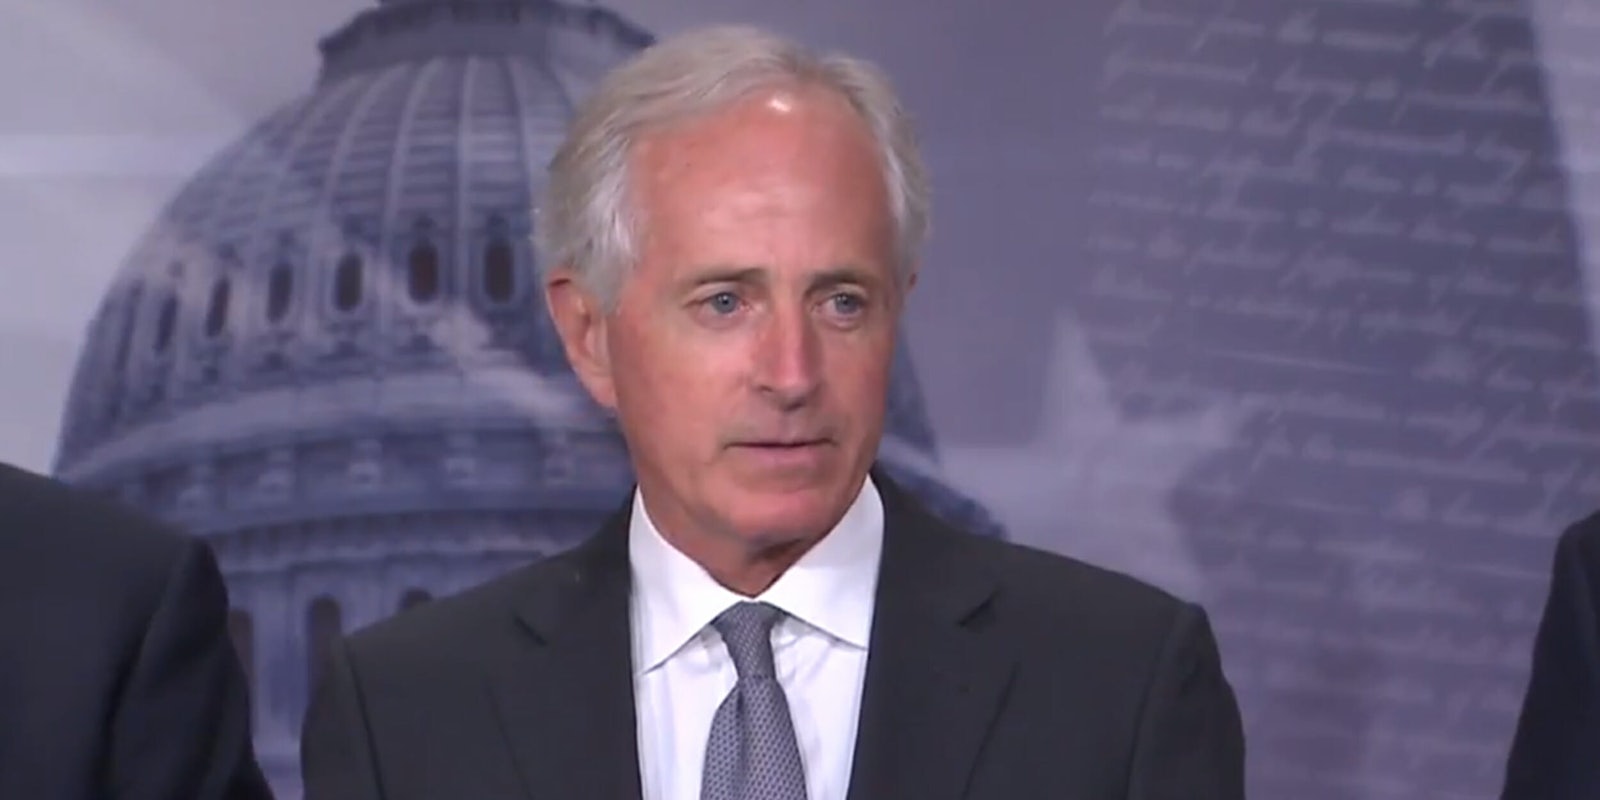 Sen. Bob Corker said he would throw the individual side of the Republican tax plan “directly to the incinerator” if he could during an interview.